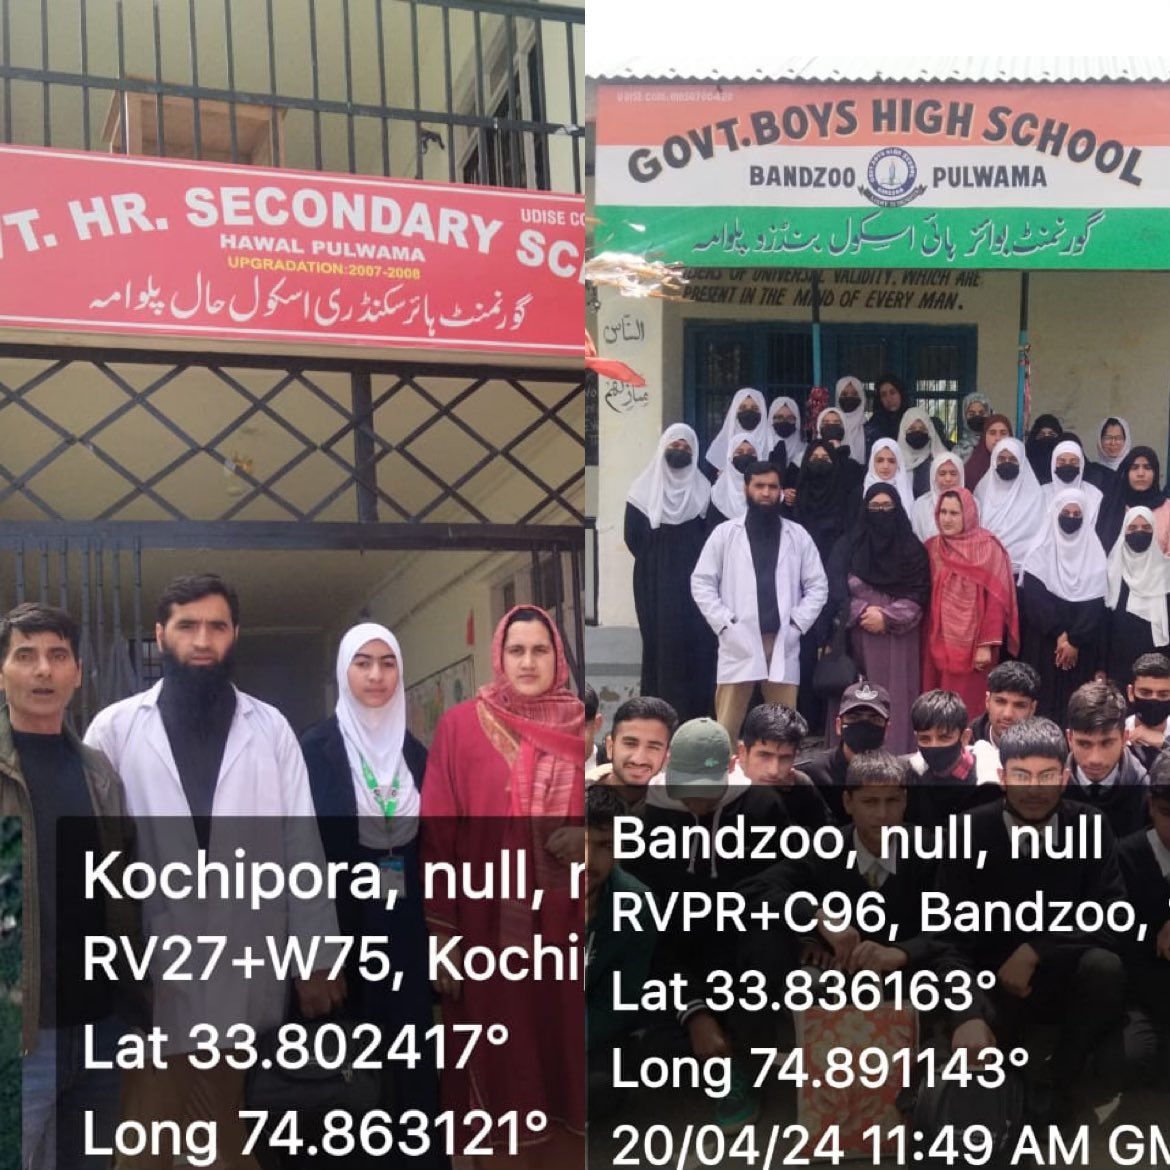 #JJM #SAFEWATER 
FTK demonstration/Water quality testing by Lab Staff Pulwama to ensure safe water at 
1. Govt Higher Secondary School Hawal
2. Govt Higher Secondary School Aripal
3. Govt Boys High School Bandzoo